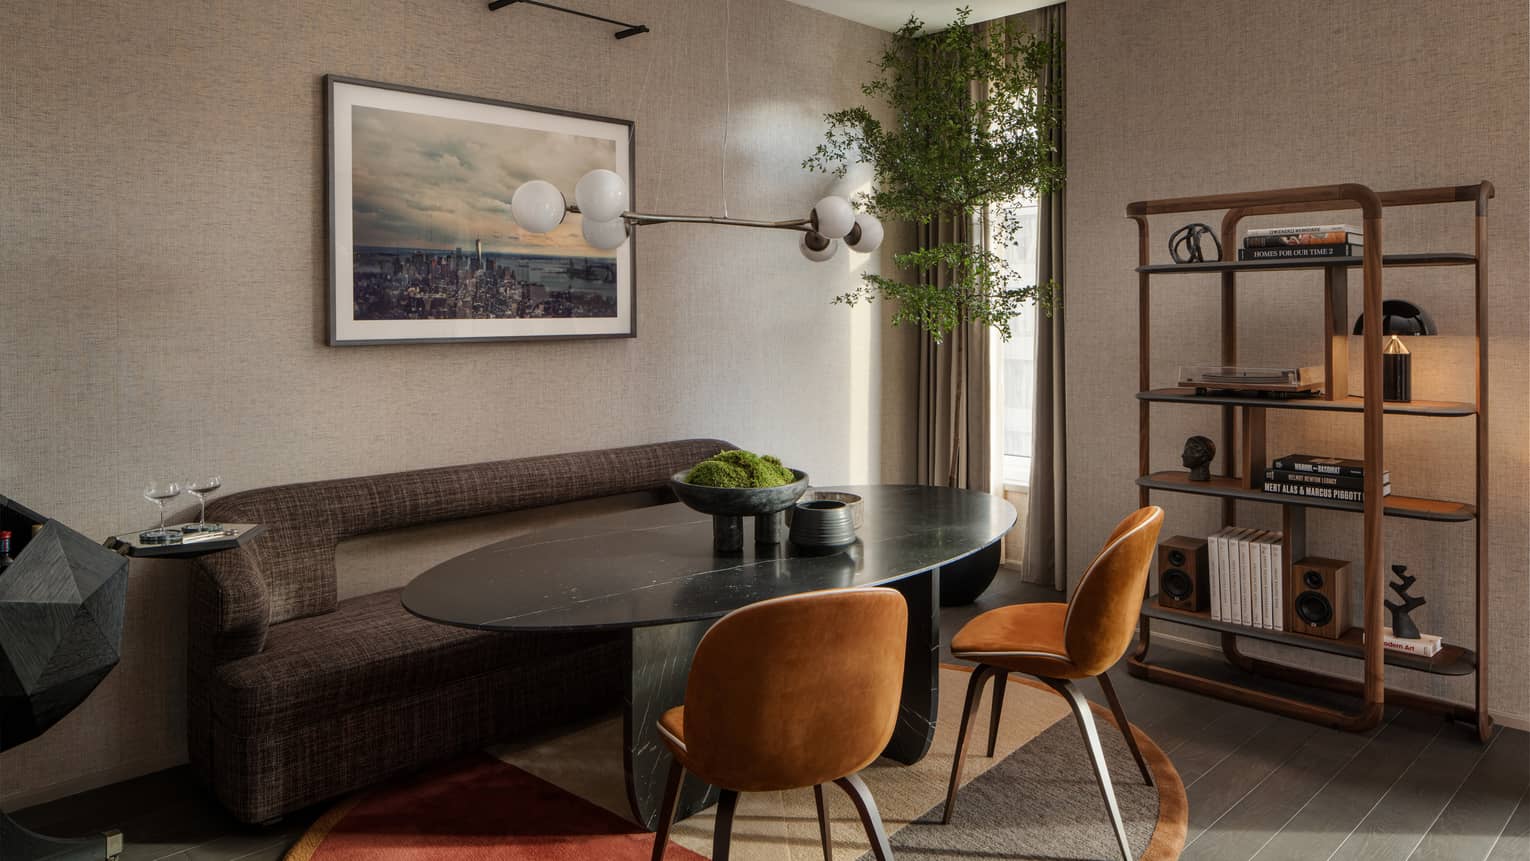 Dining area in a stylish, mid-century modern hotel suite